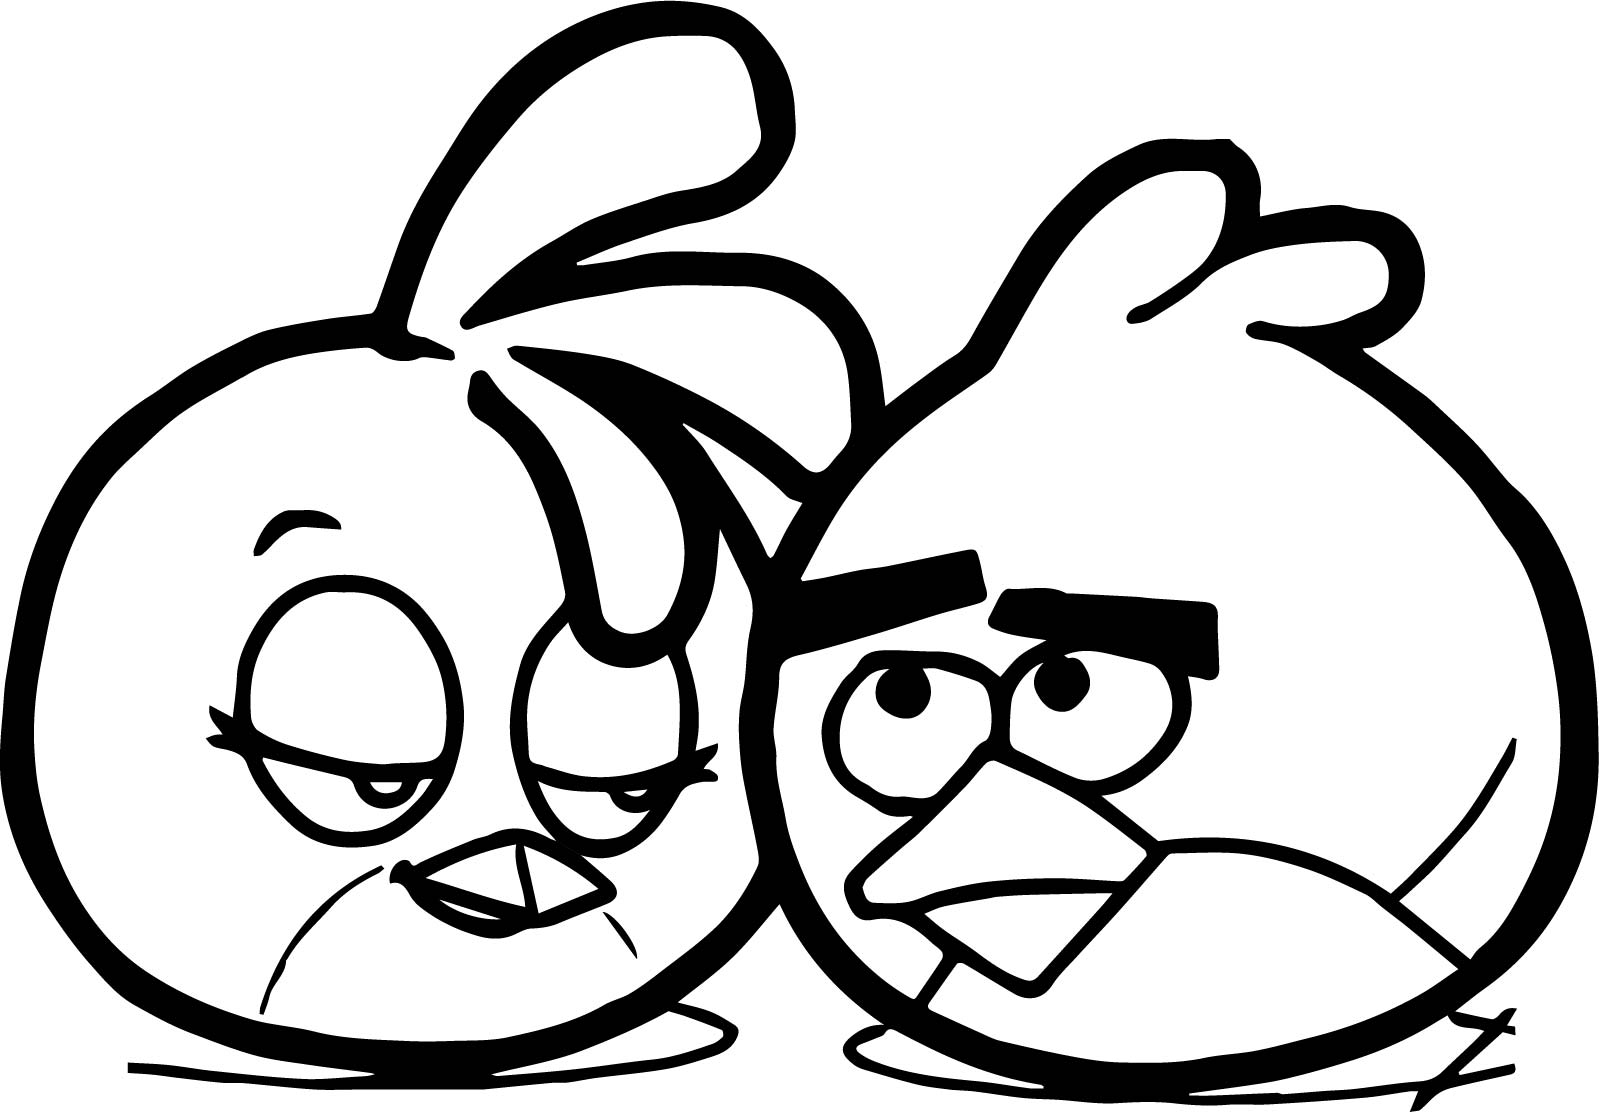 Angry Birds Heroic Rescue Coloring Page – Wecoloringpage.com